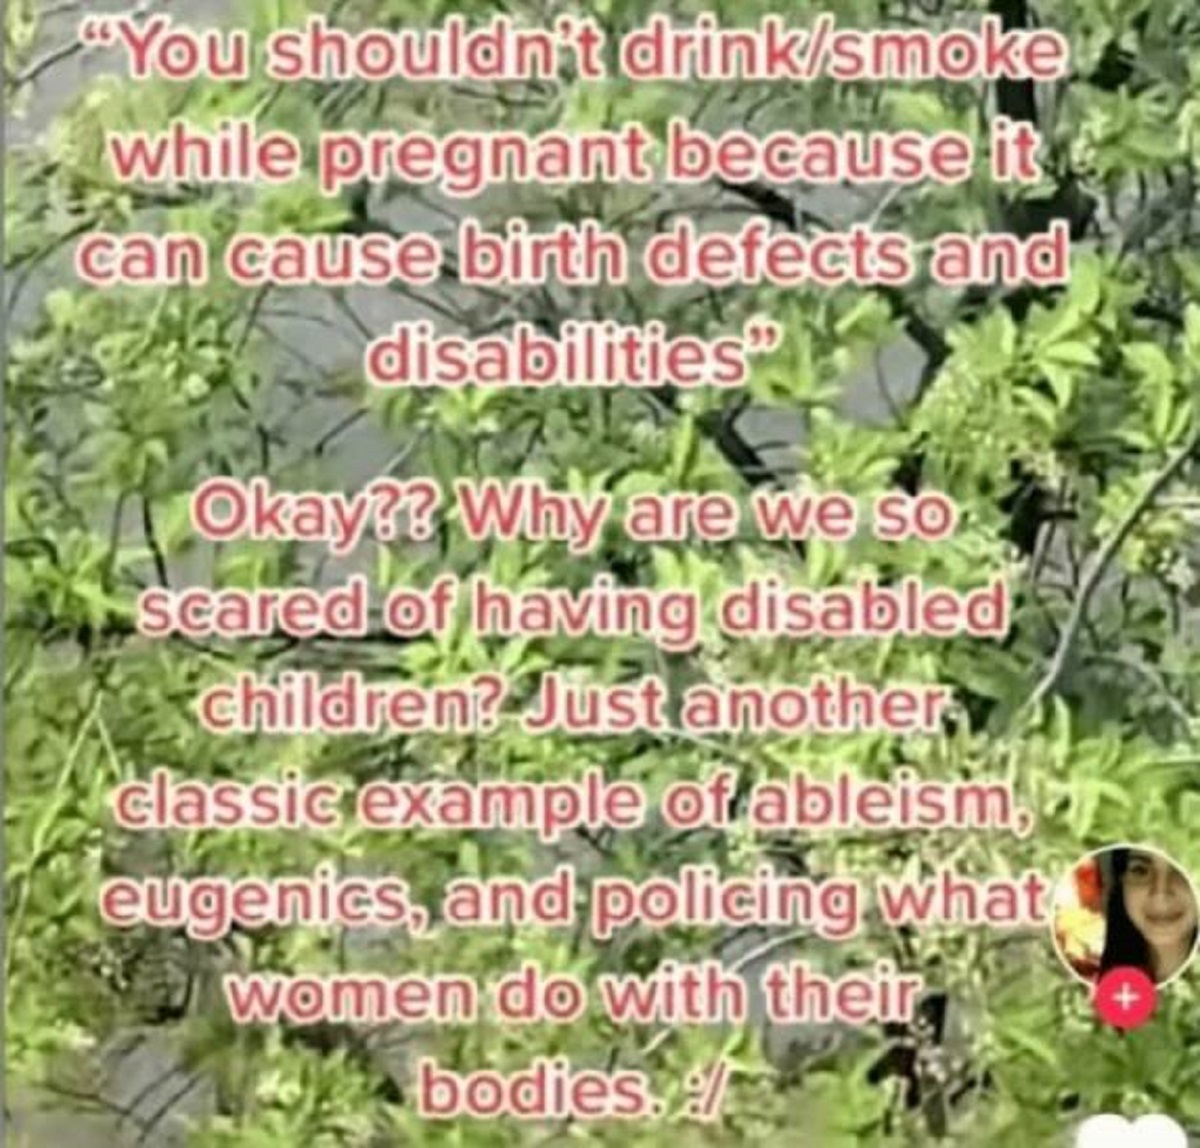 verbena - "You shouldn't drinksmoke while pregnant because it can cause birth defects and disabilities Okay?? Why are we so scared of having disabled children? Just another classic example of ableism, eugenics, and policing what women do with their bodies